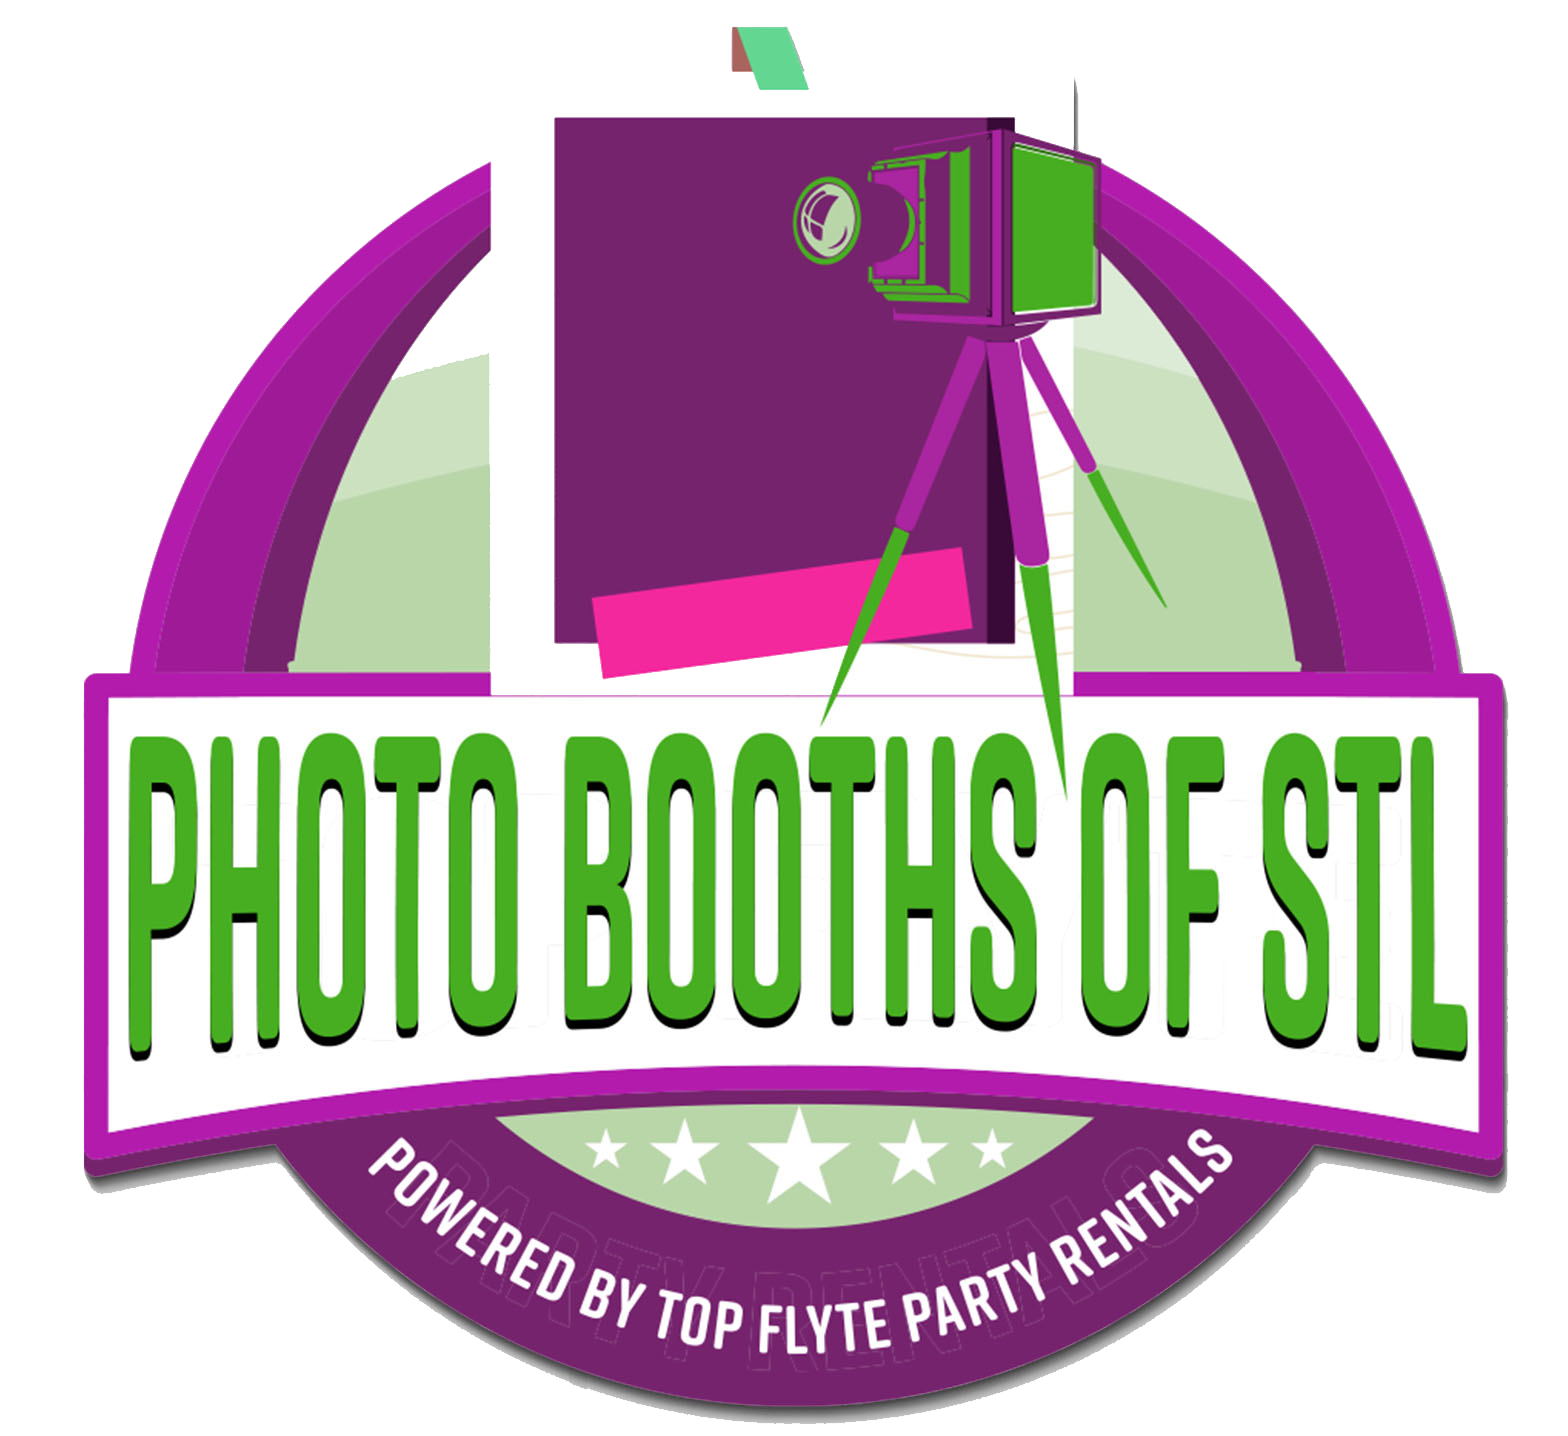 Photo-Booths-Of-STL-jpg-1-2.png